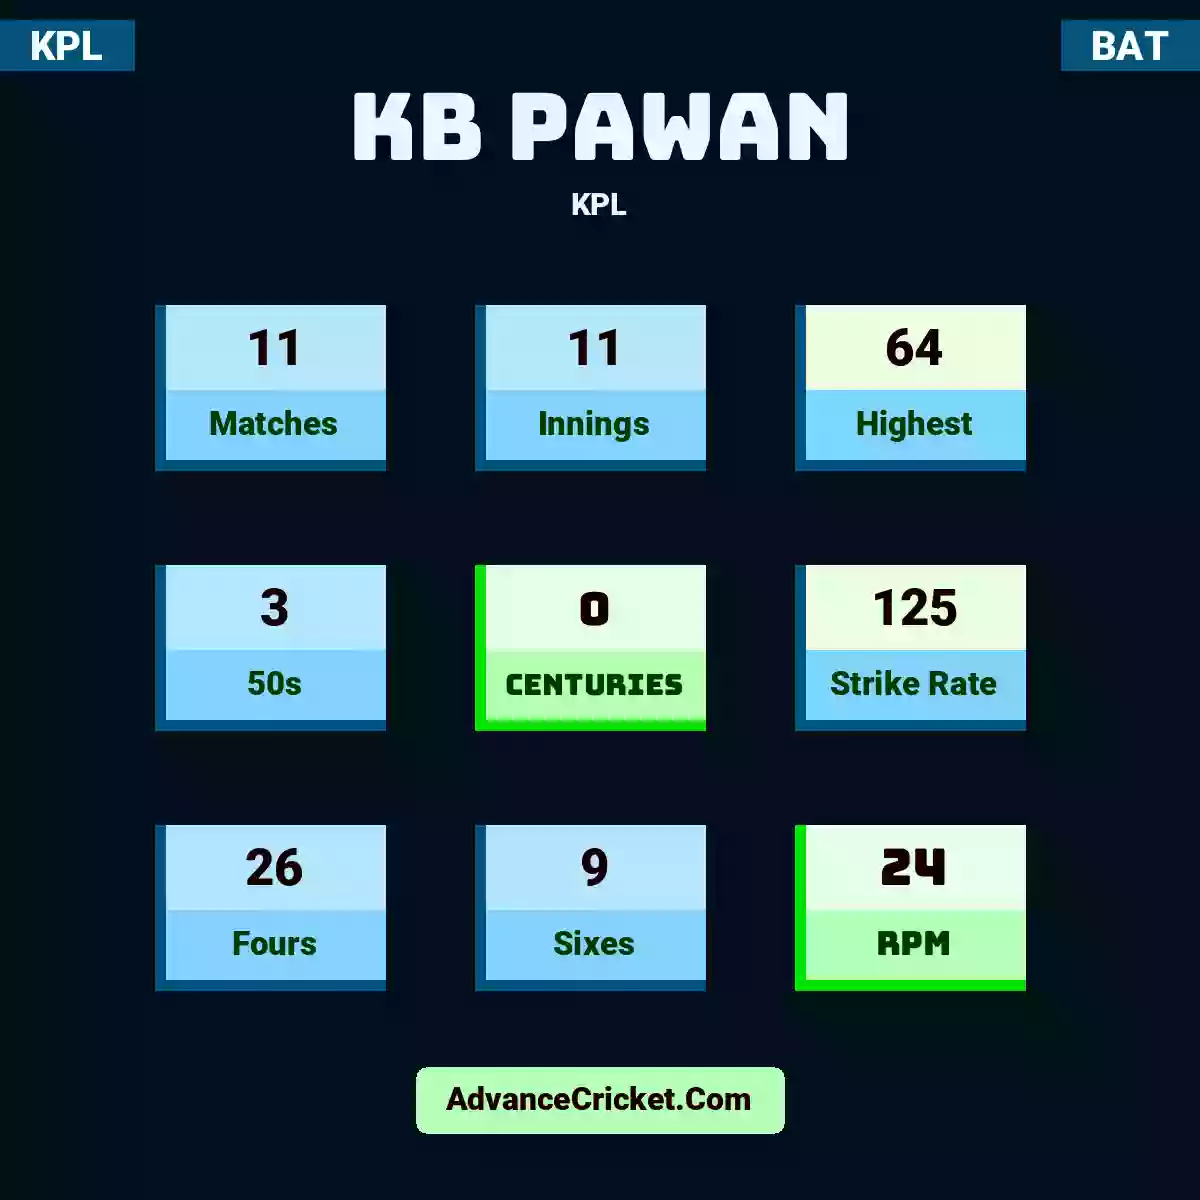 KB Pawan KPL , KB Pawan played 11 matches, scored 64 runs as highest, 3 half-centuries, and 0 centuries, with a strike rate of 125. K.Pawan hit 26 fours and 9 sixes, with an RPM of 24.